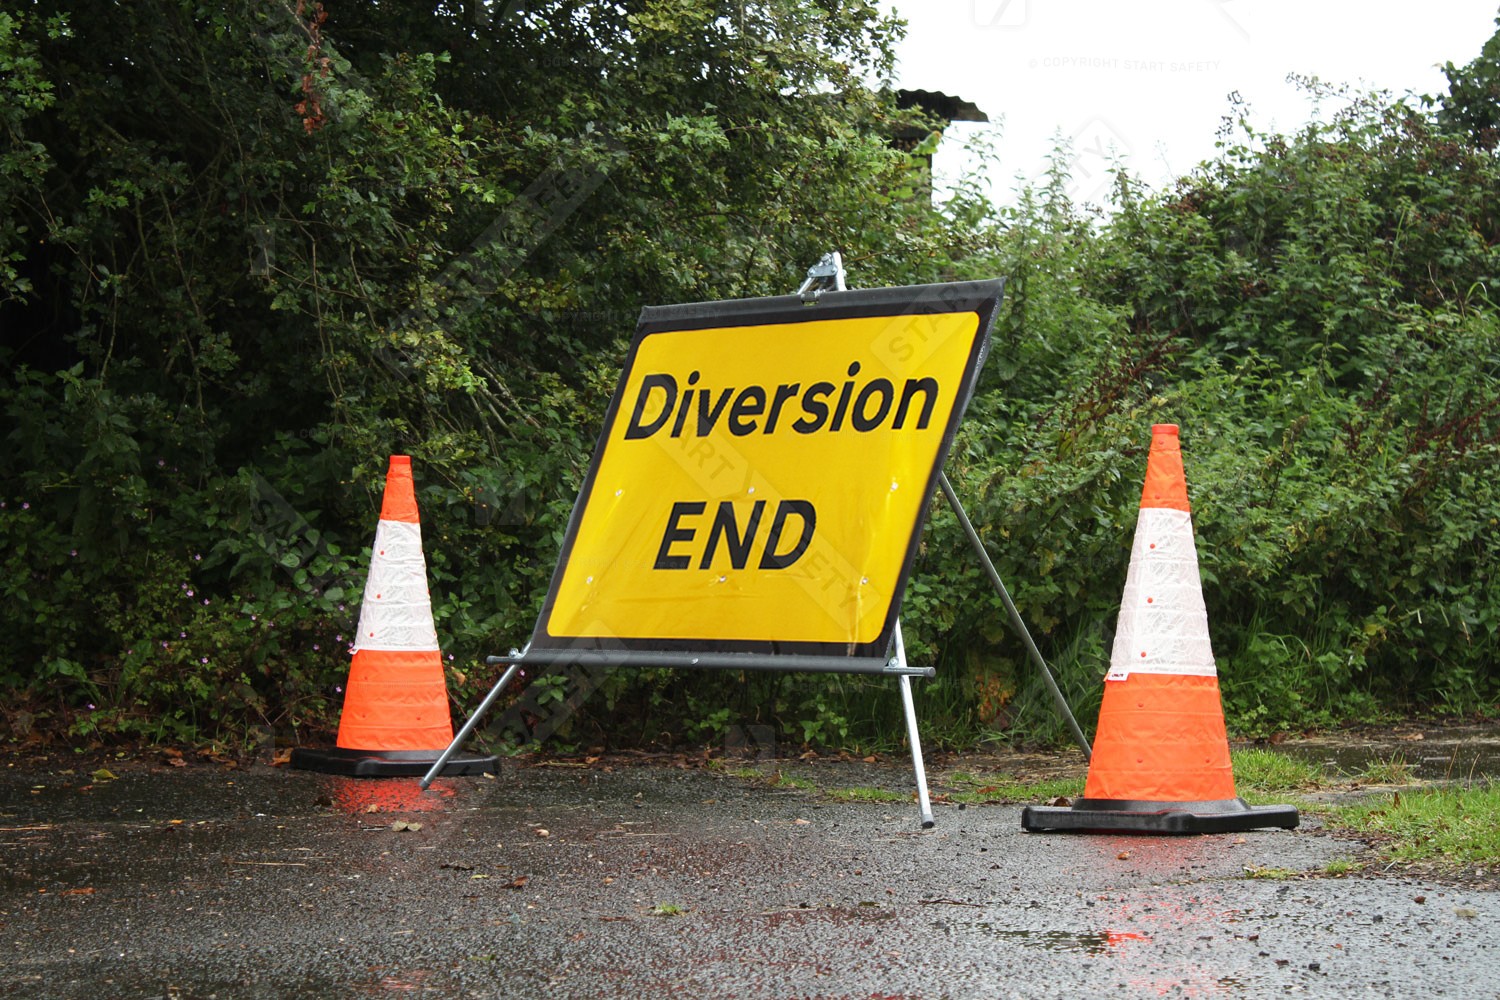 Quazar Diversion End Roll Up Sign In Use On The Road